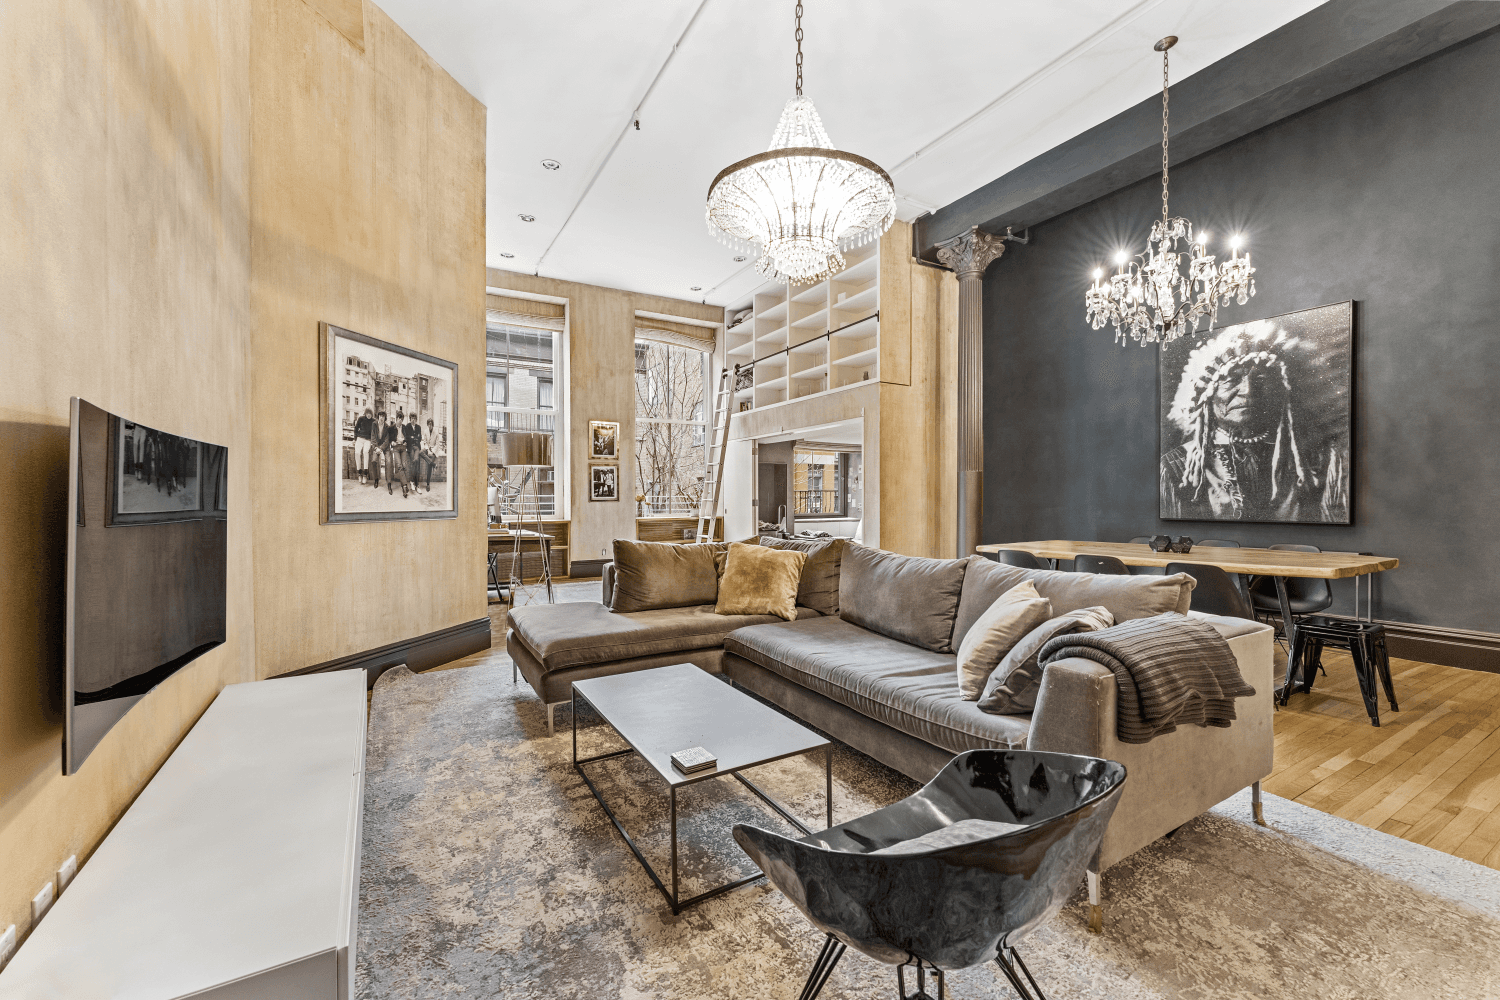 Application accepted Awaiting board approvalQUINTESSENTIAL CROSBY STREET LOFTClassic SoHo Loft Living Luxurious Residence with Modern Amenities in the Heart of Historic DistrictLocated amid world class restaurants and shops in Soho's ...